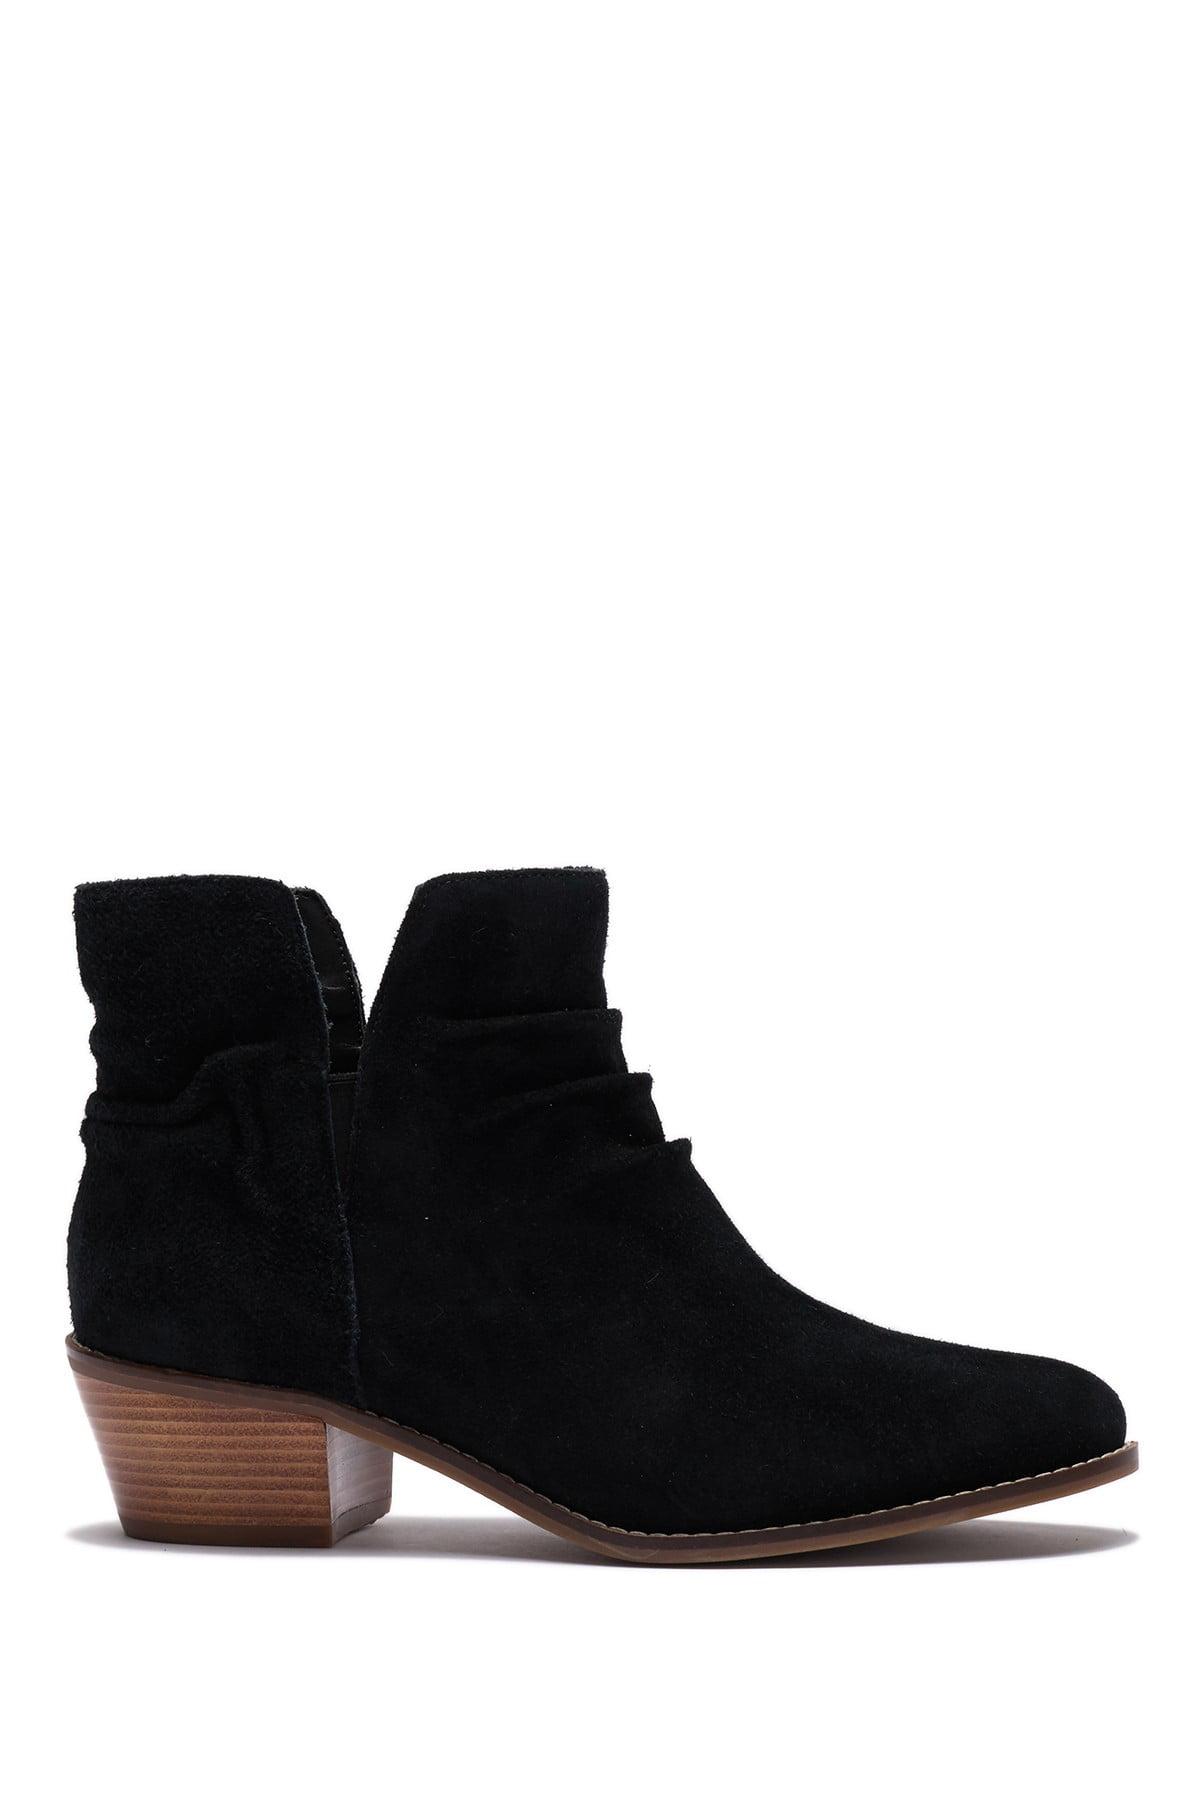 Cole Haan Womens Alayna Slouch Bootie Ankle Boot 